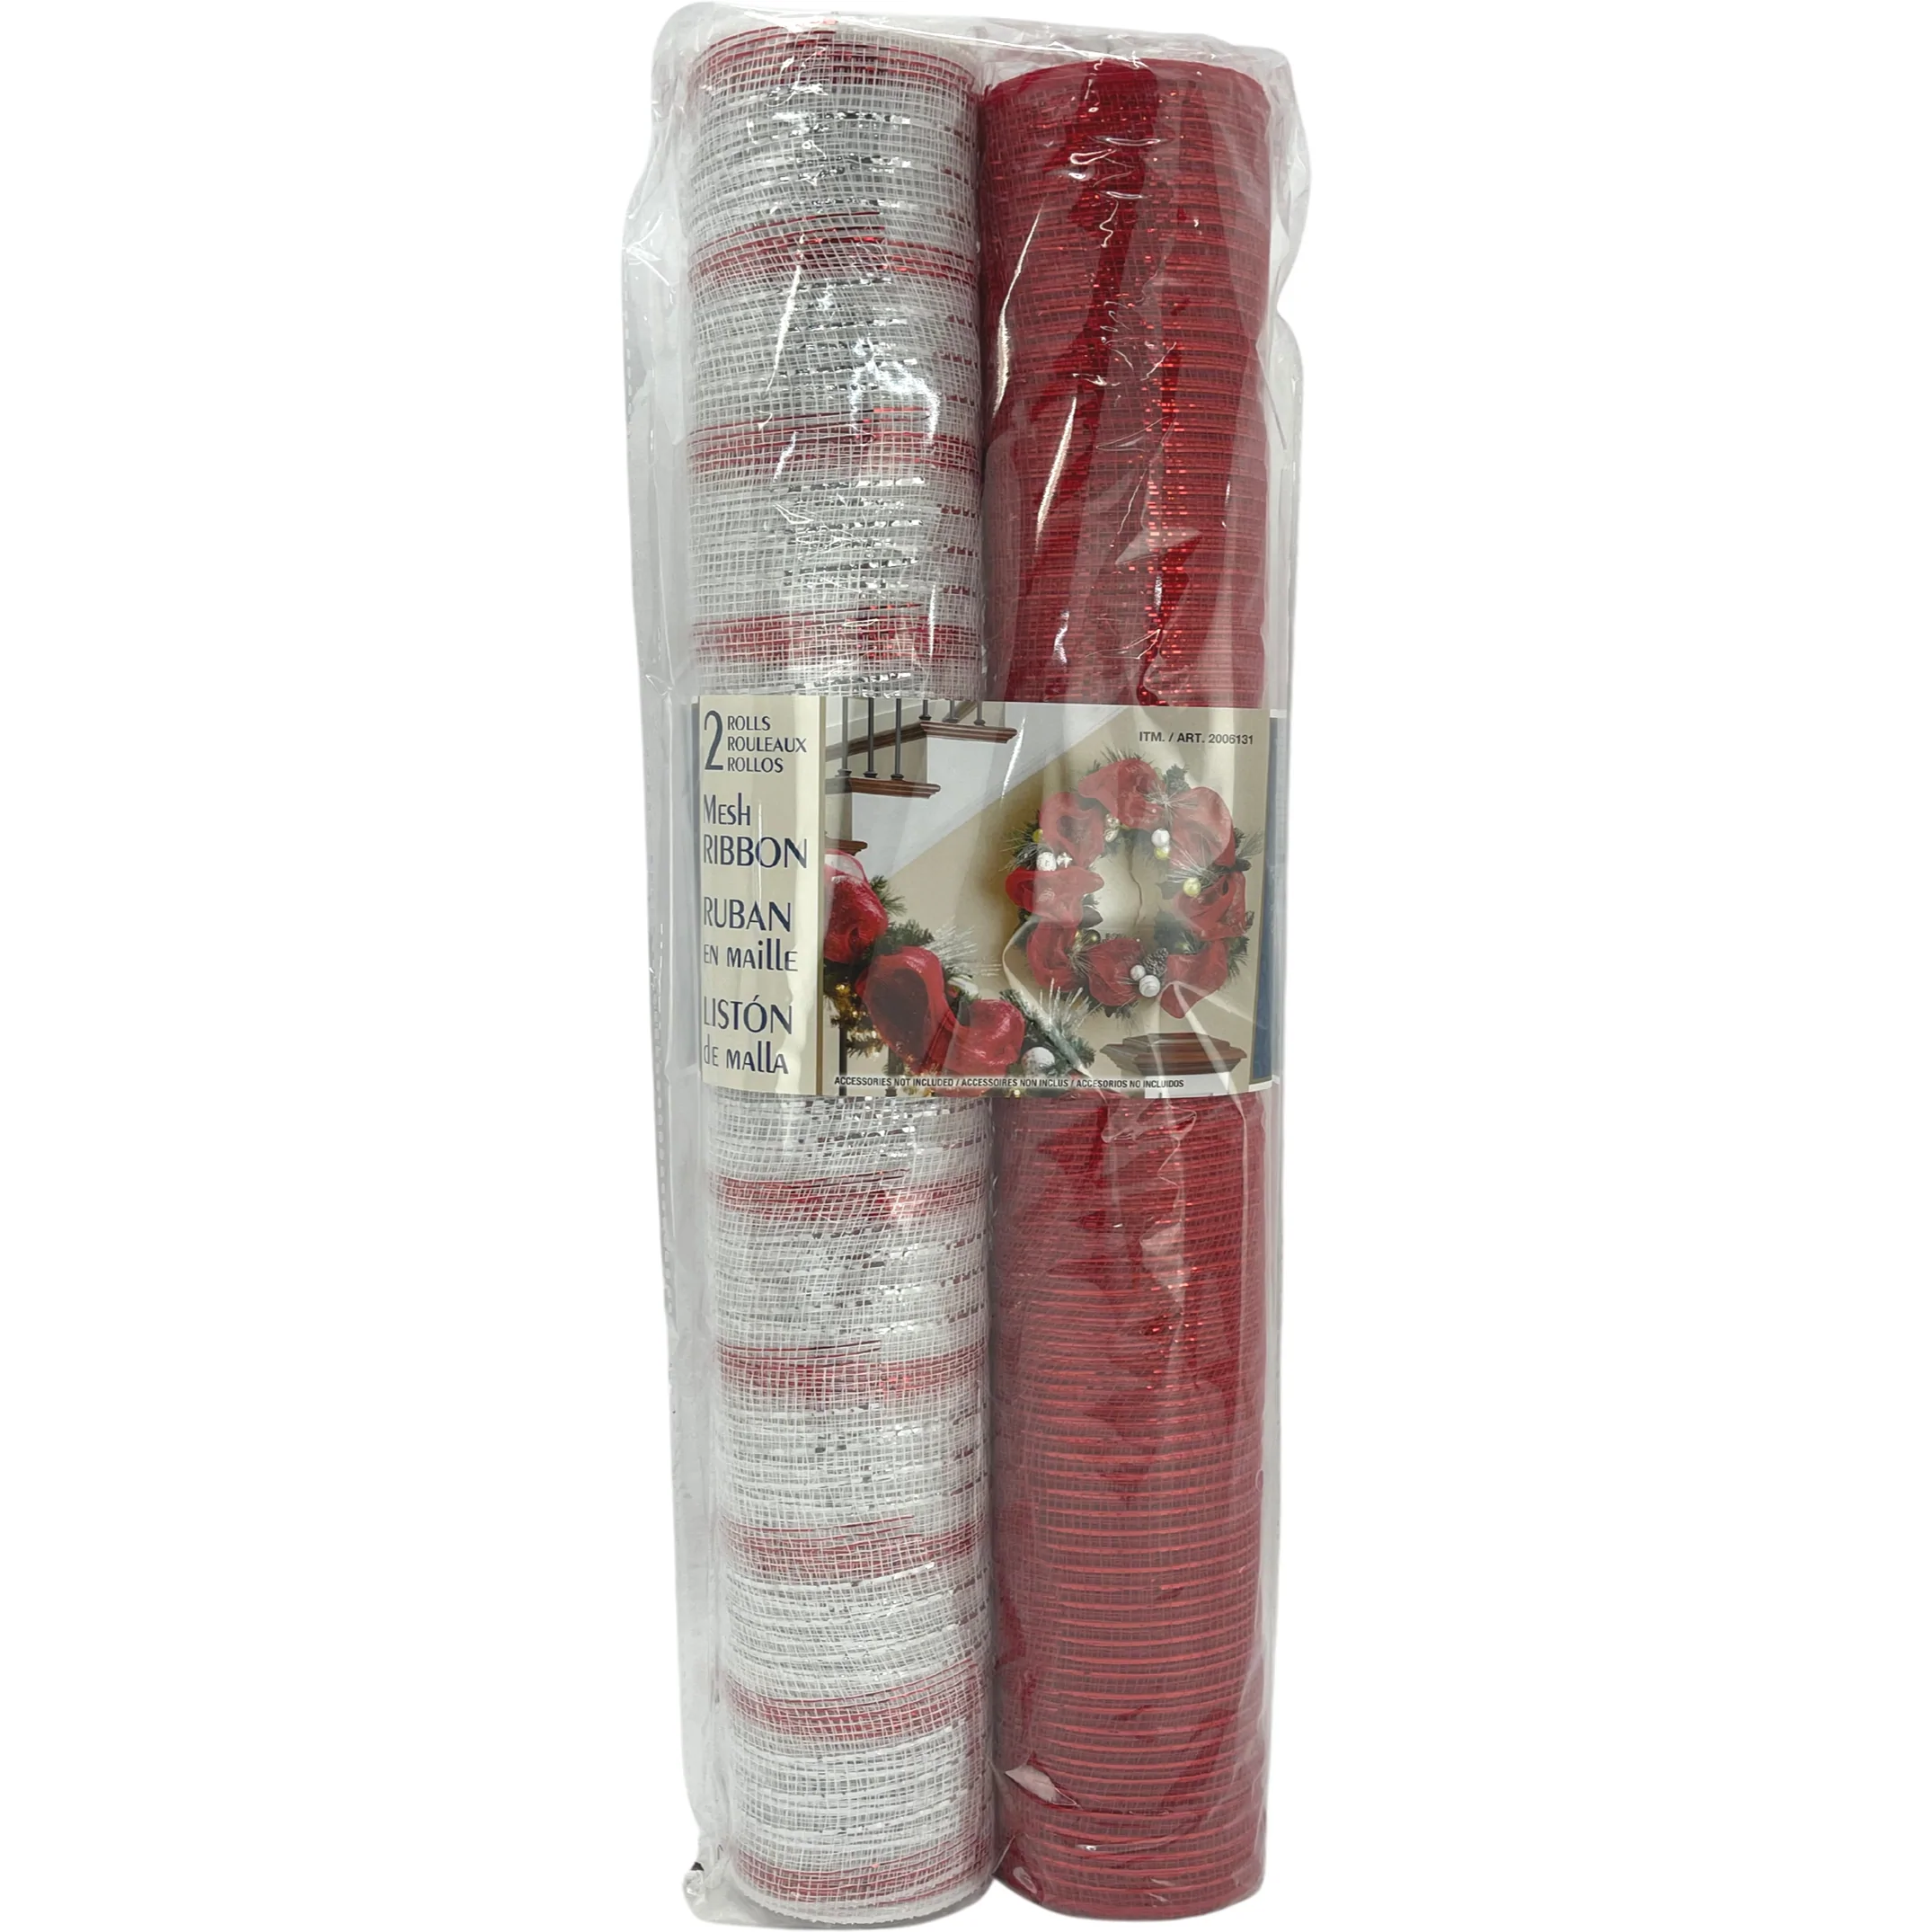 Decorative Christmas Garland / 2 Pack / Mesh / 20 Yards by 20.5 Inches / Red & Stripes